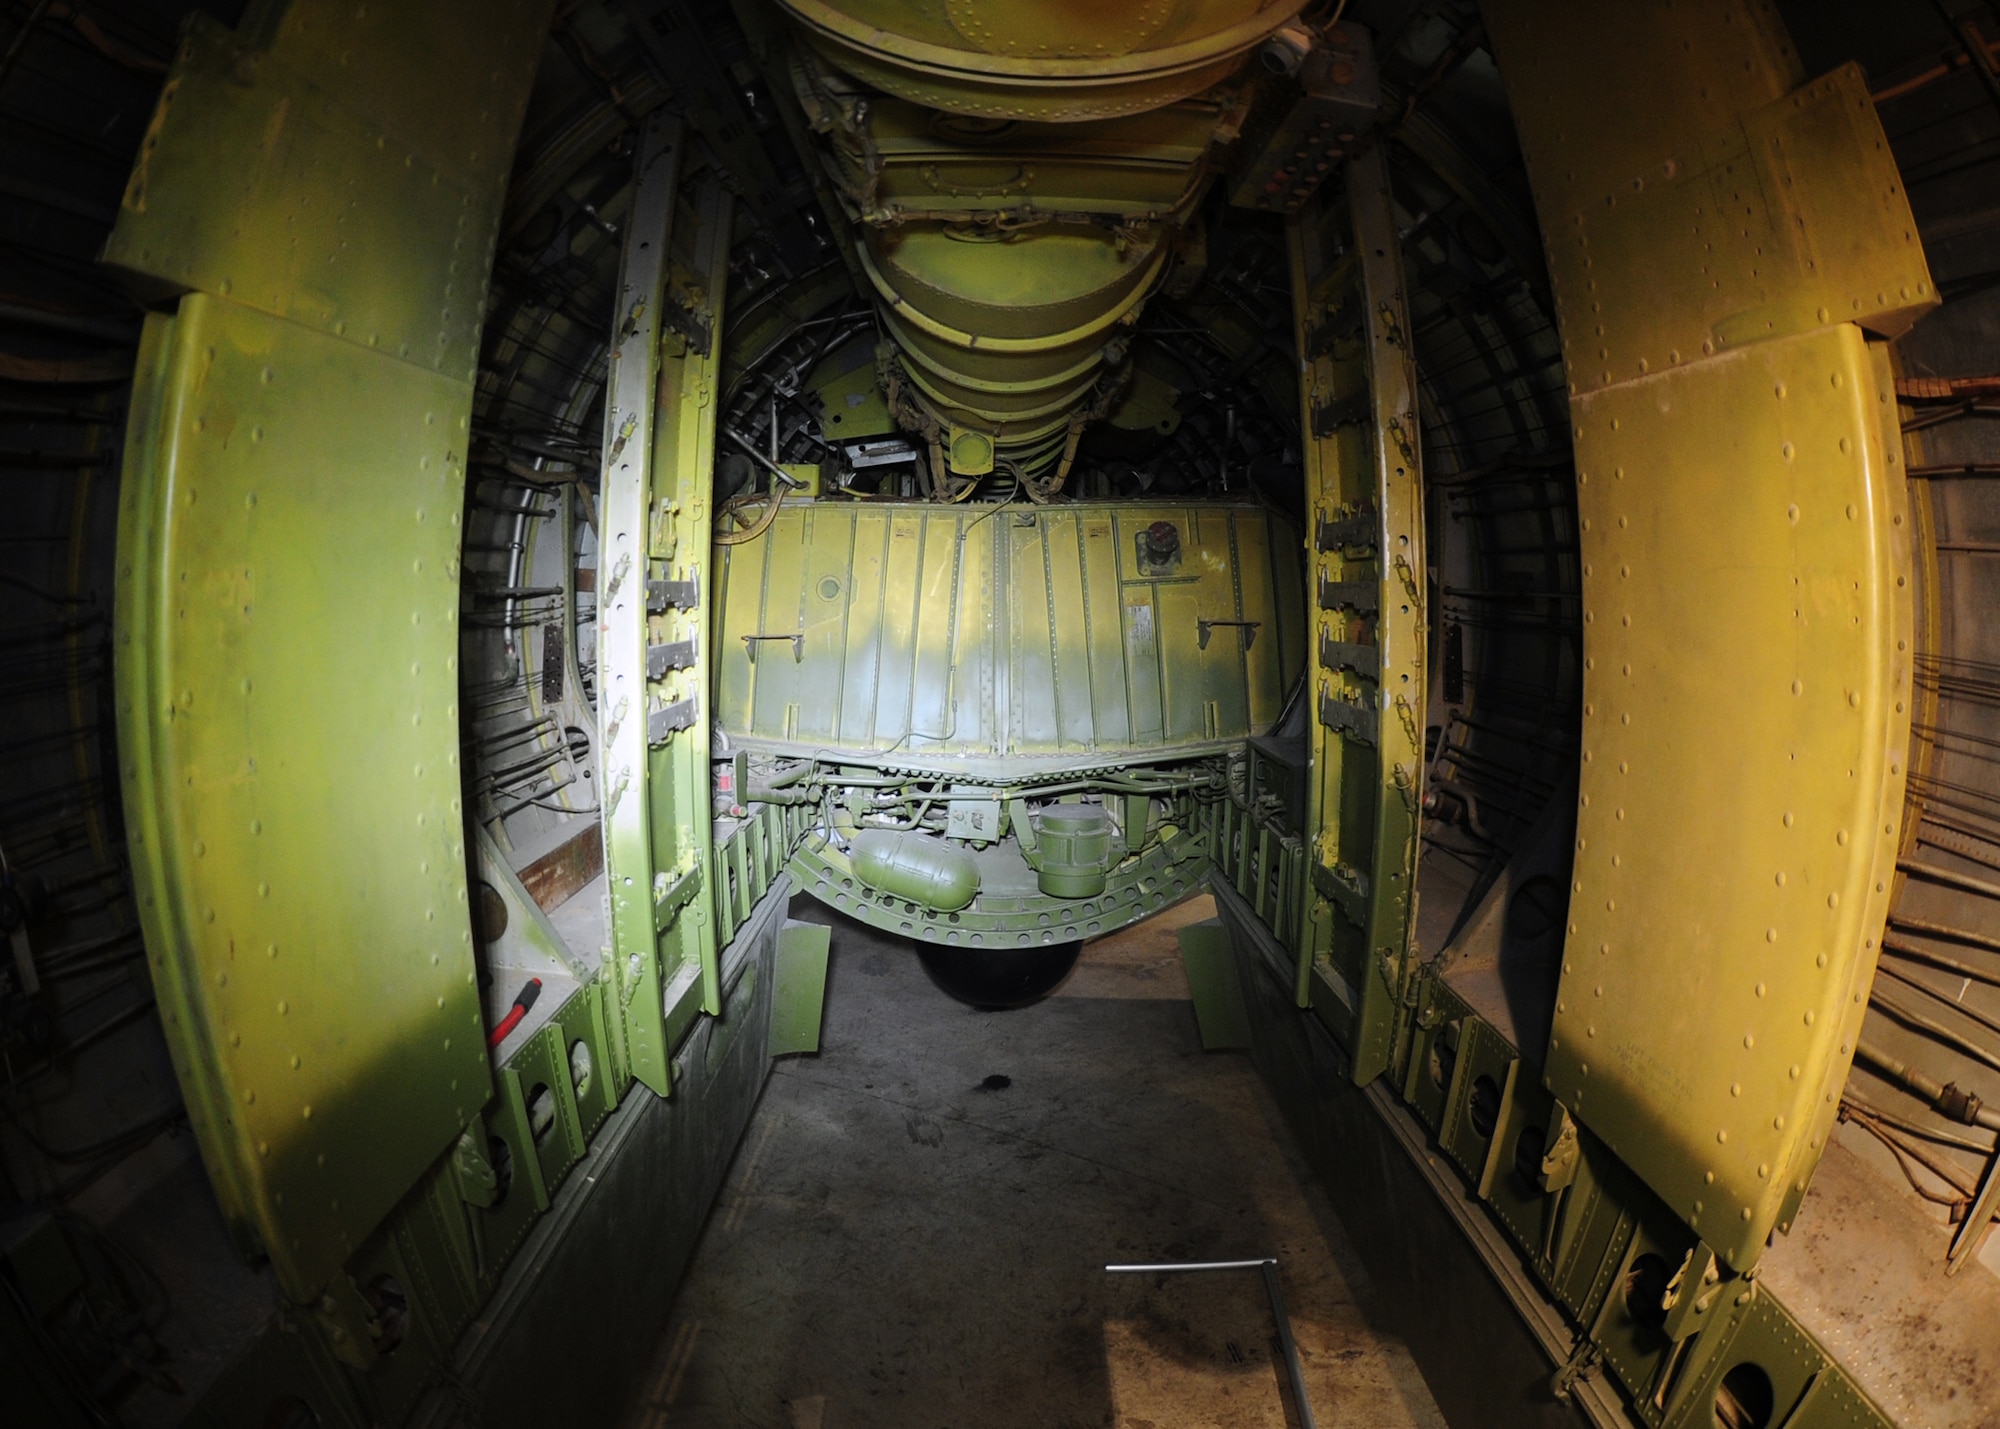 DAYTON, Ohio - Boeing B-29 Superfortress "Bockscar" interior view of the bomb bay in the WWII Gallery at the National Museum of the U.S. Air Force. (U.S. Air Force photo)